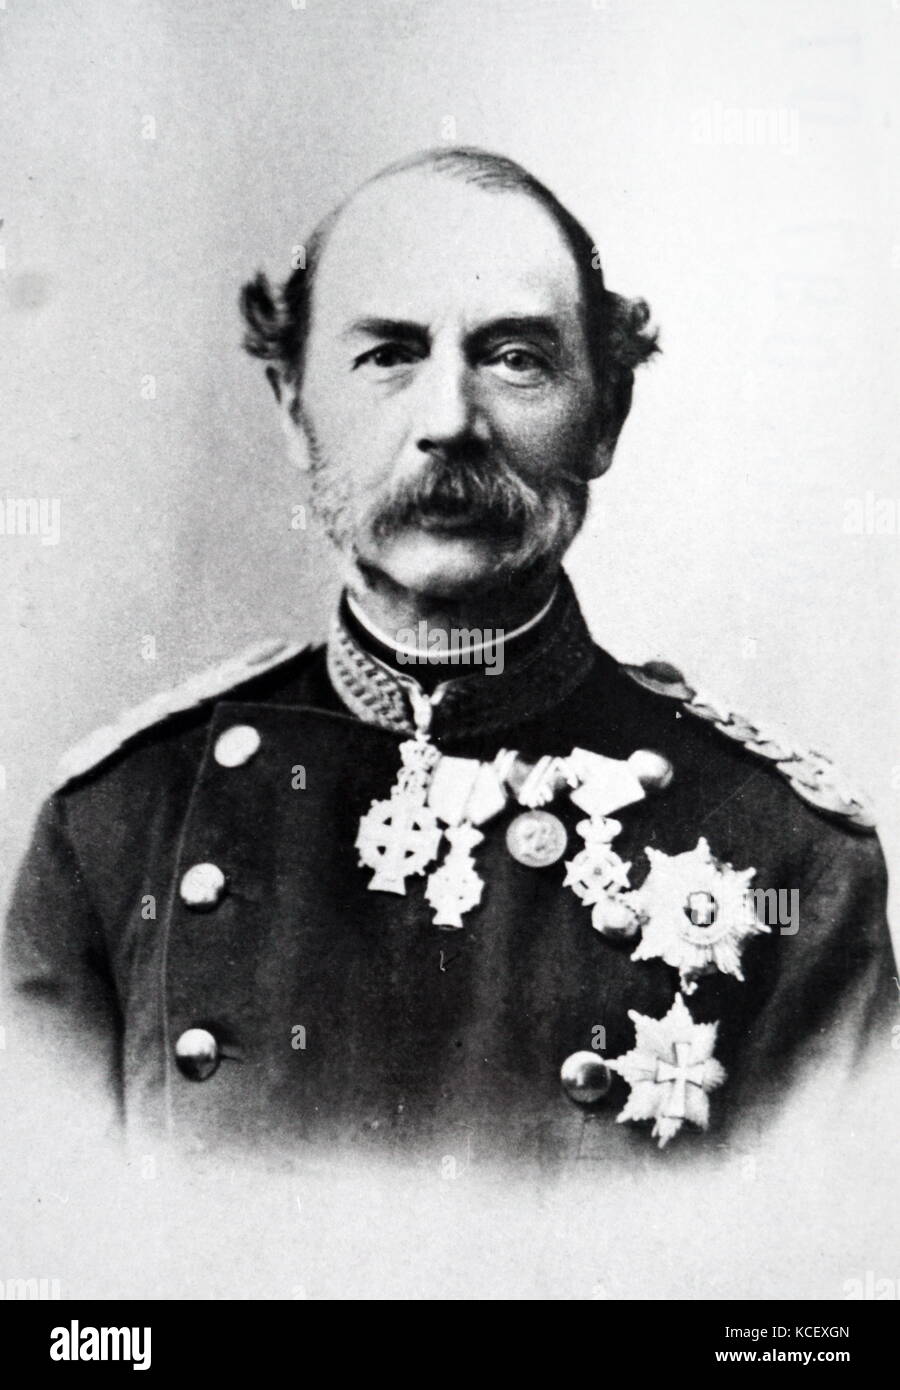 Photograph of King Christian IX (8 April 1818 – 29 January 1906) was King of Denmark from 1863 to 1906. Dated 19th Century Stock Photo